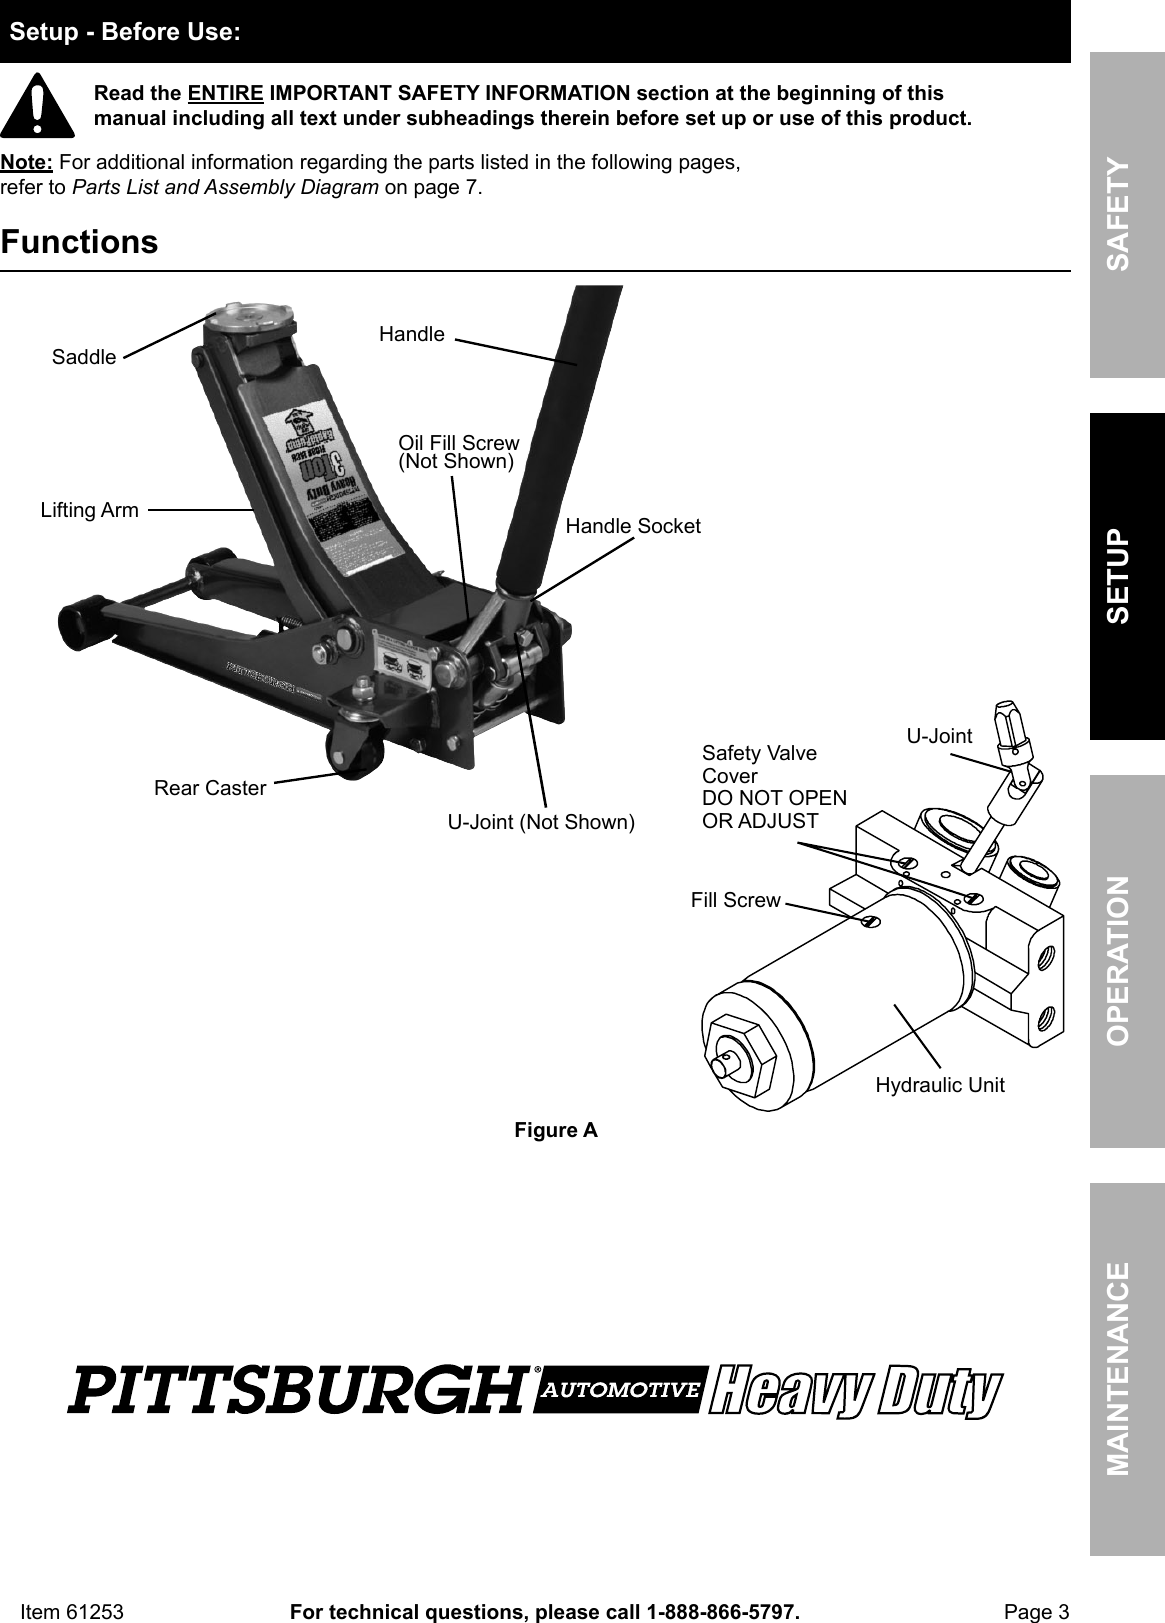 Page 3 of 8 - Manual For The 61253 3 Ton Low Profile Steel Heavy Duty Floor Jack With Rapid Pump®